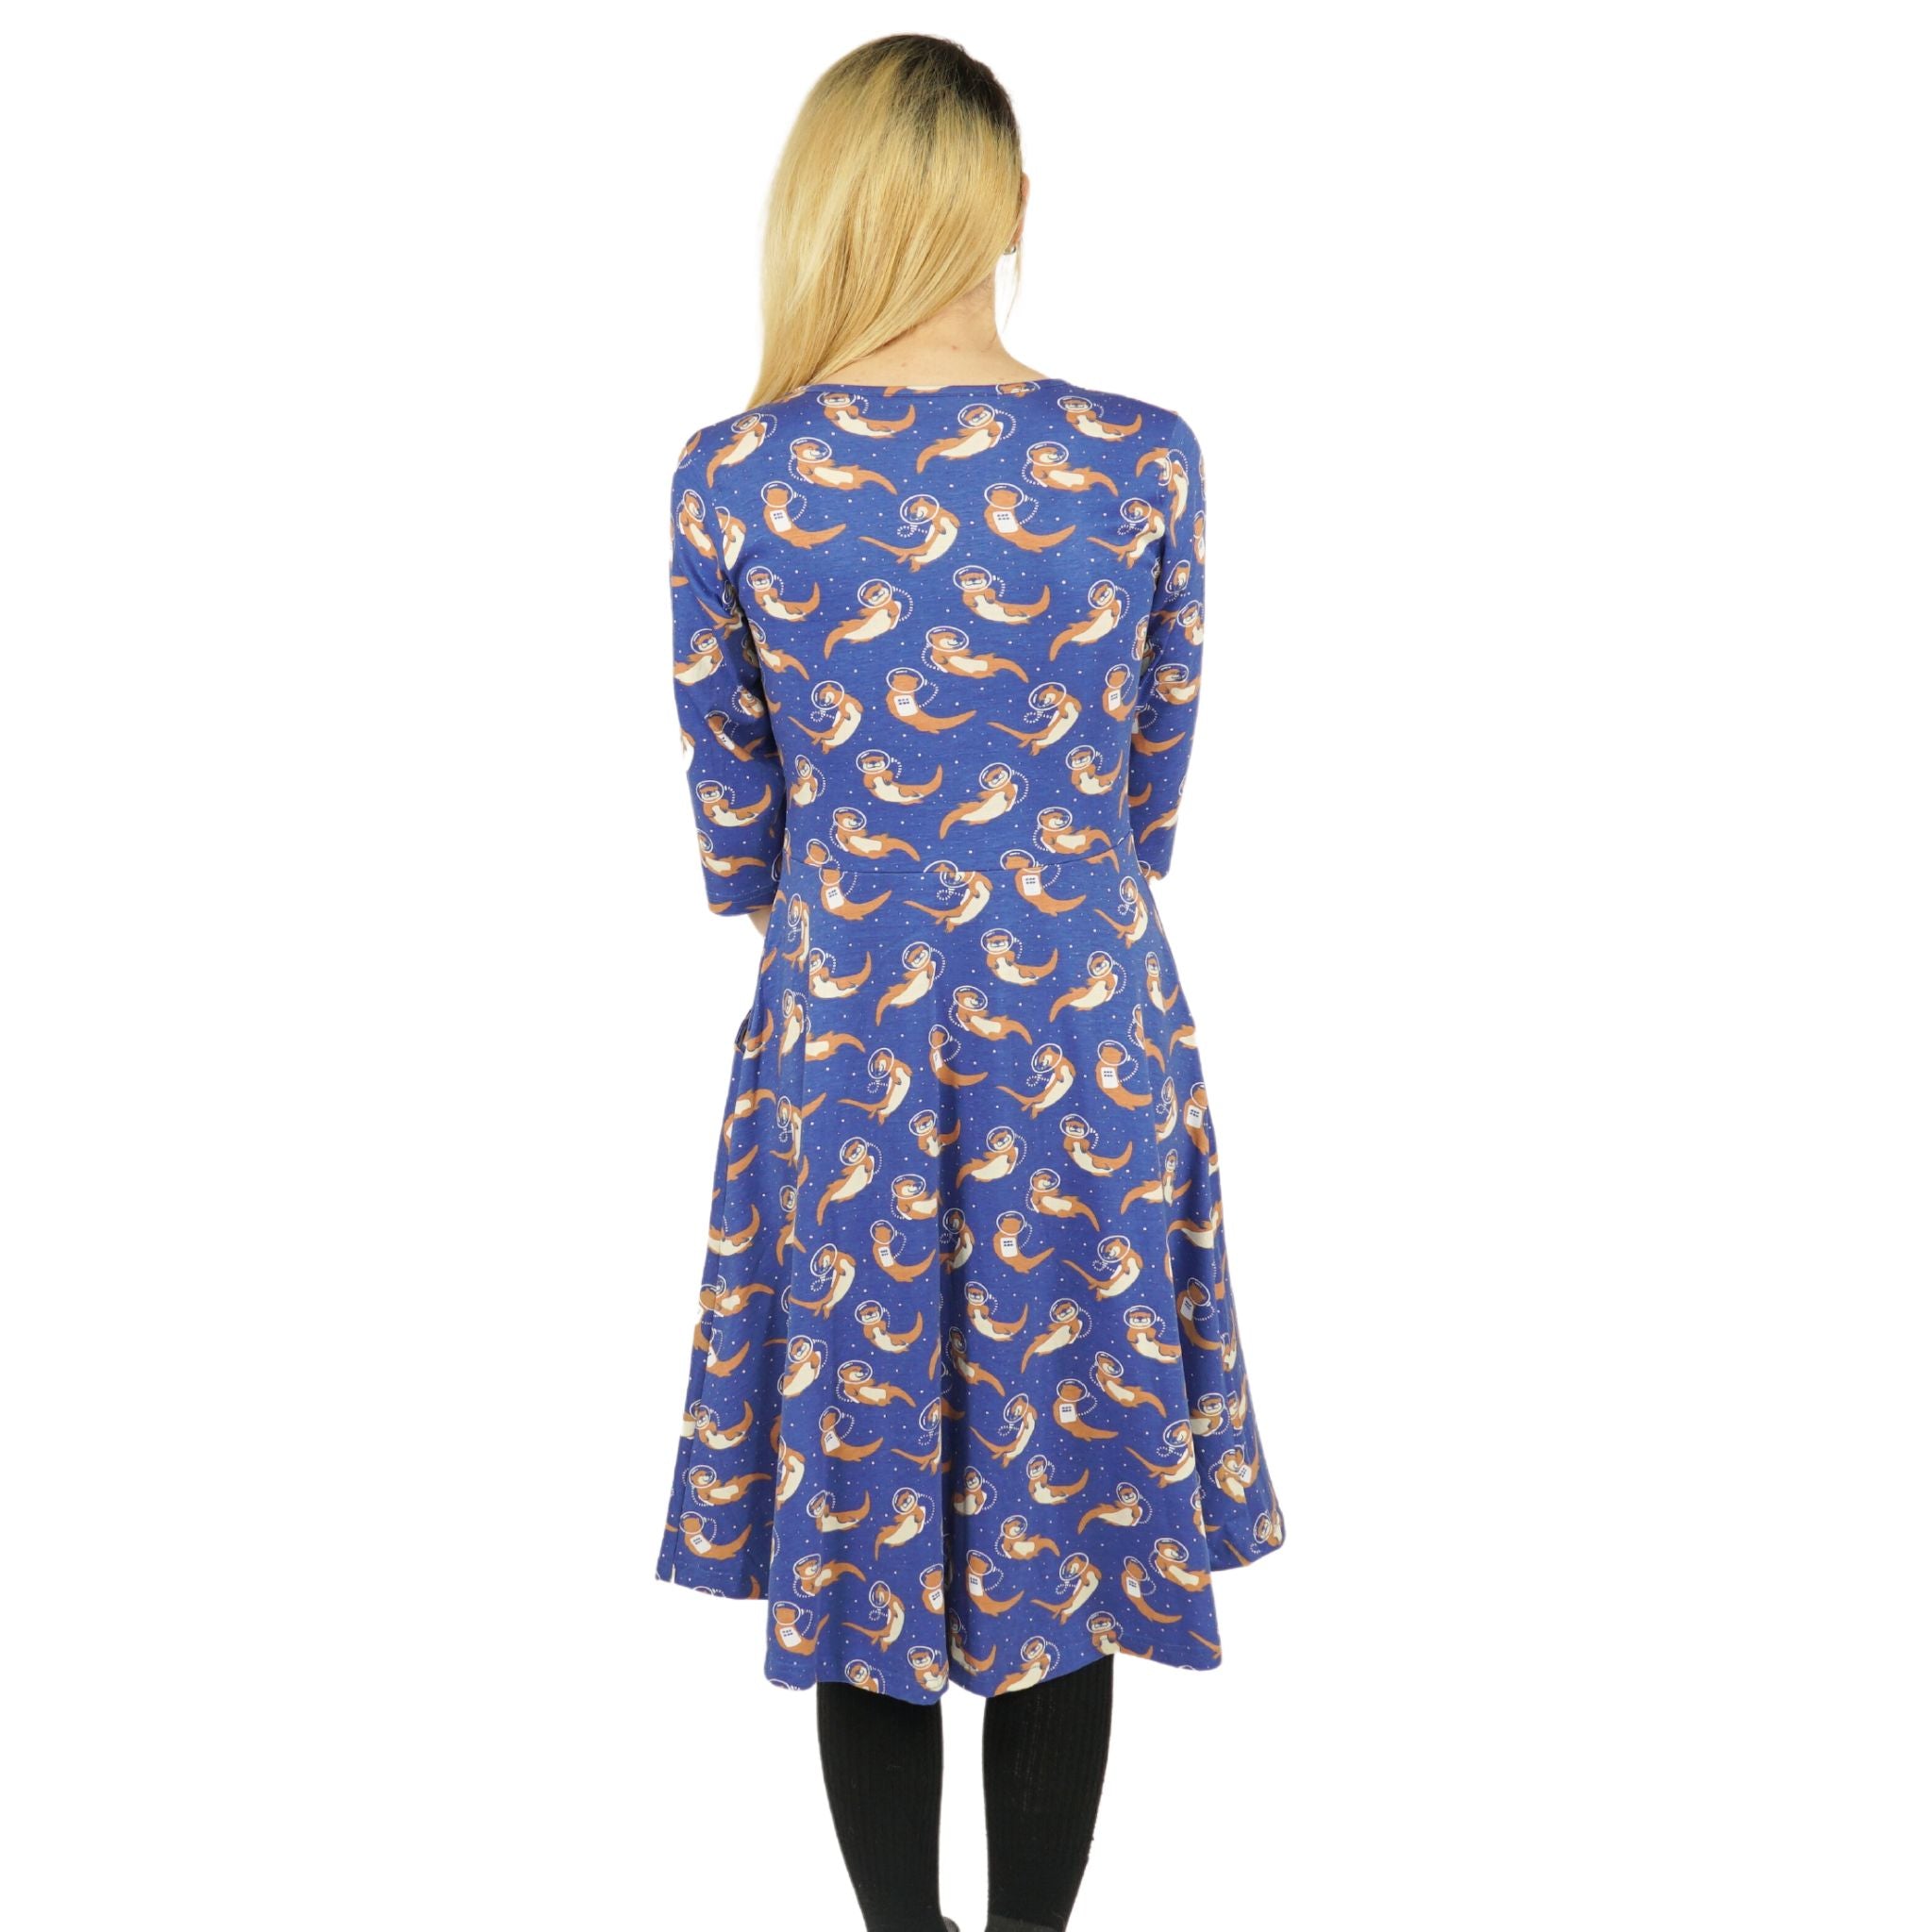 Otters in Space 3/4th Sleeves Fit & Flare Dress